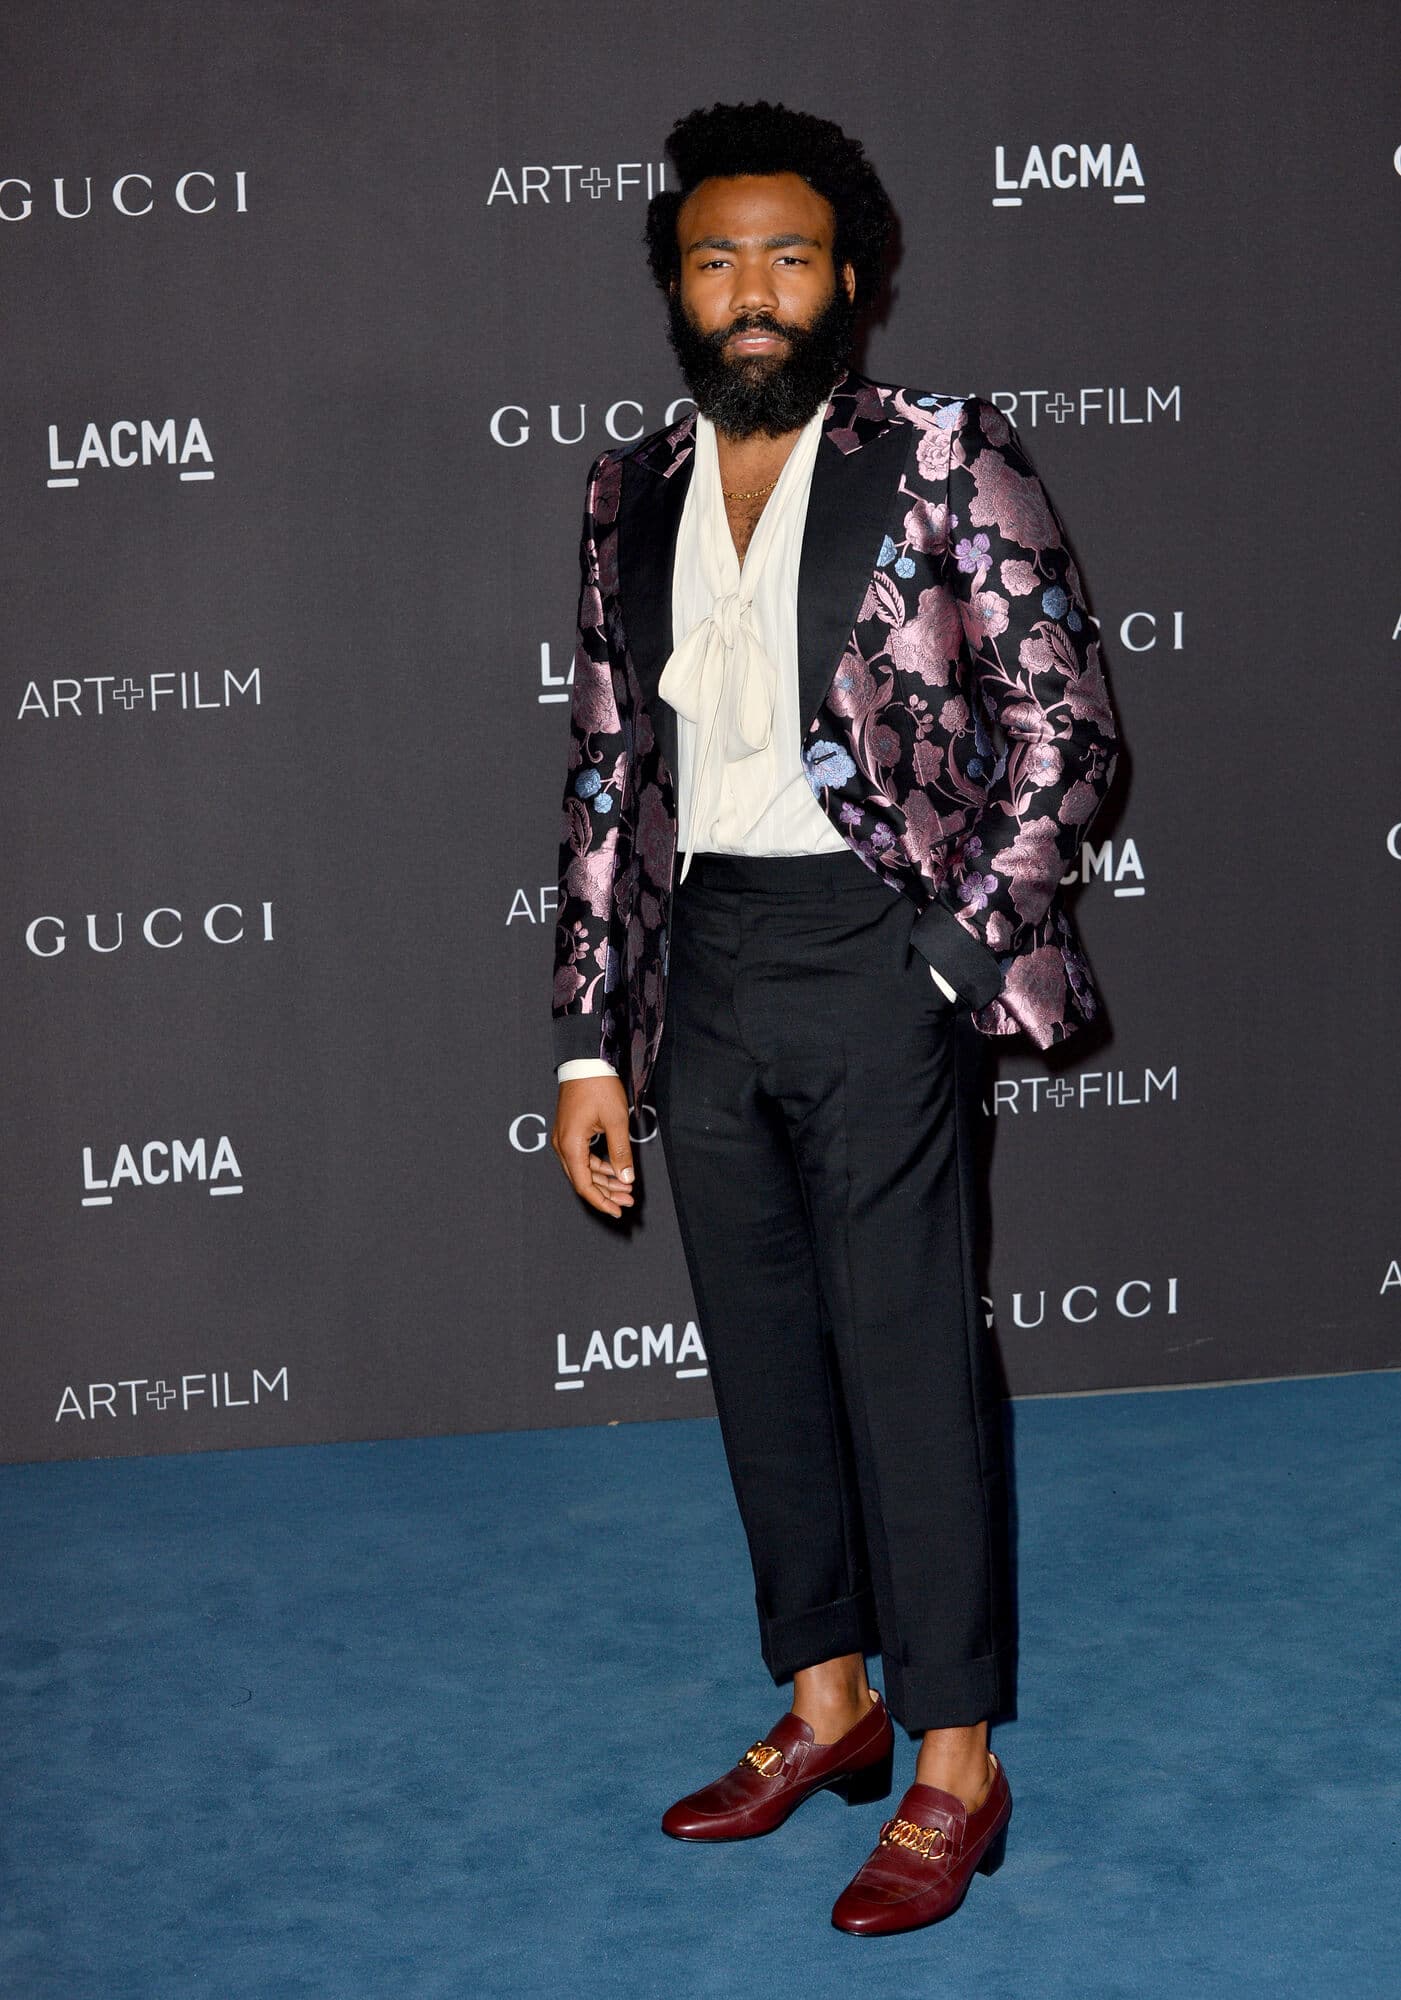 Donald Glover at the LACMA 2019